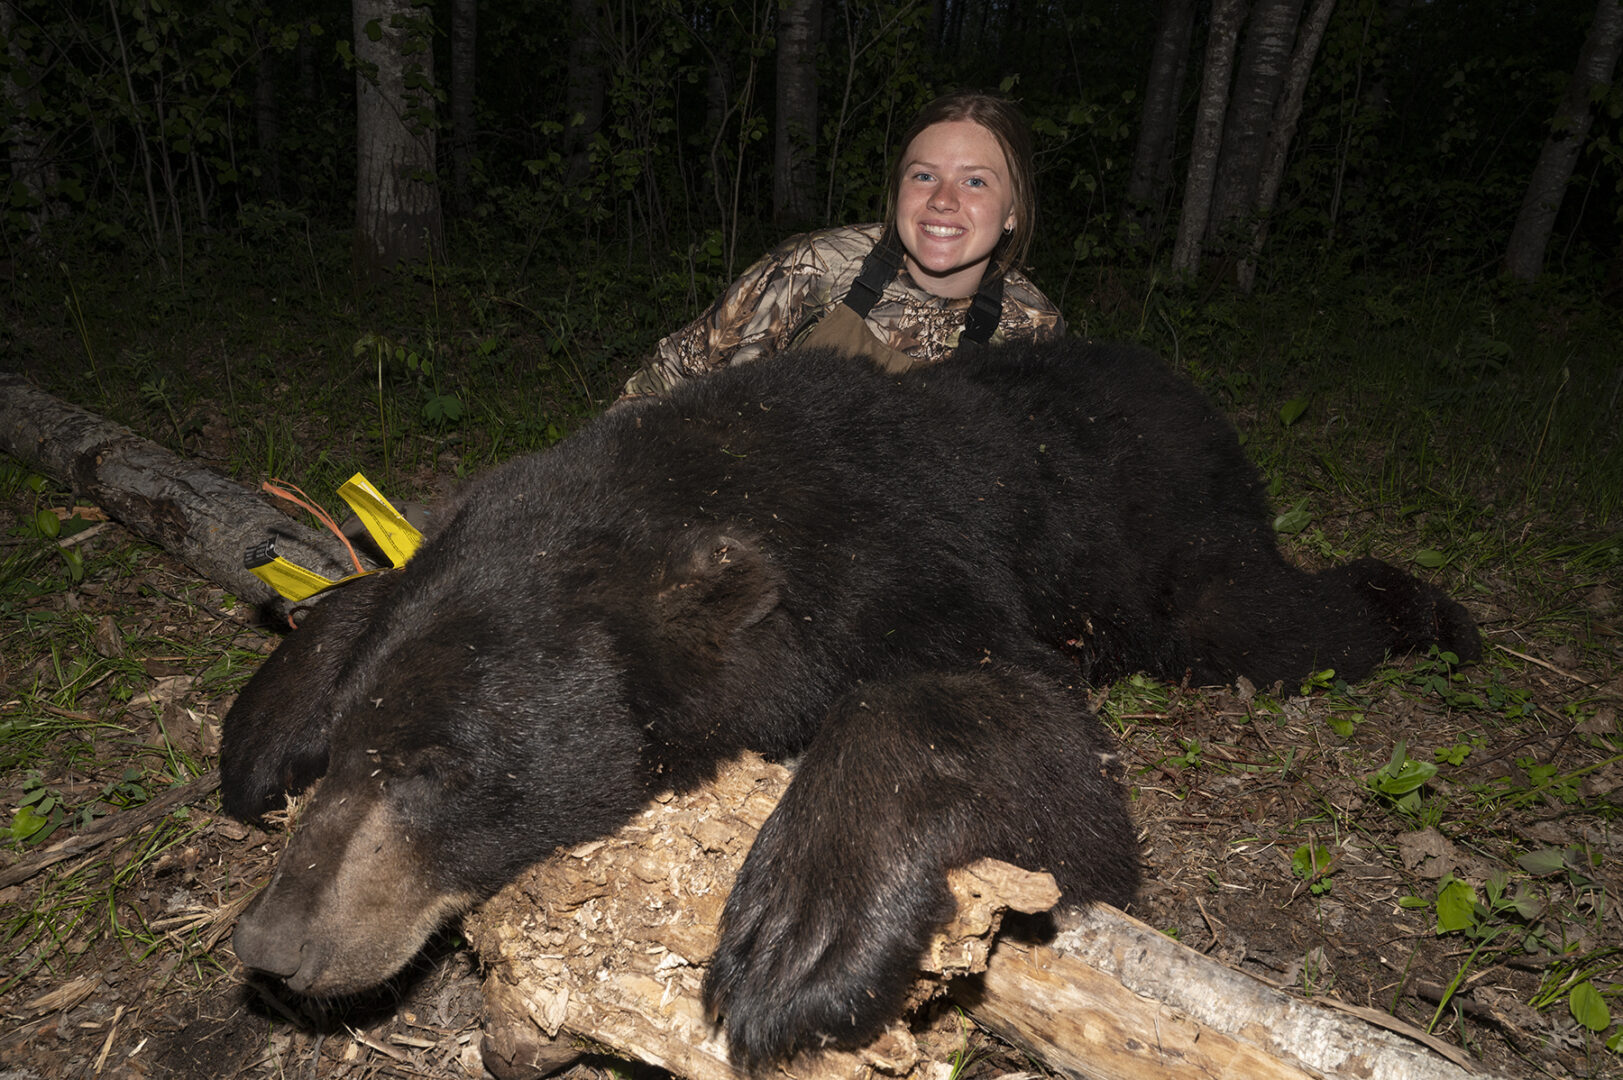 A woman is sitting next to a bear